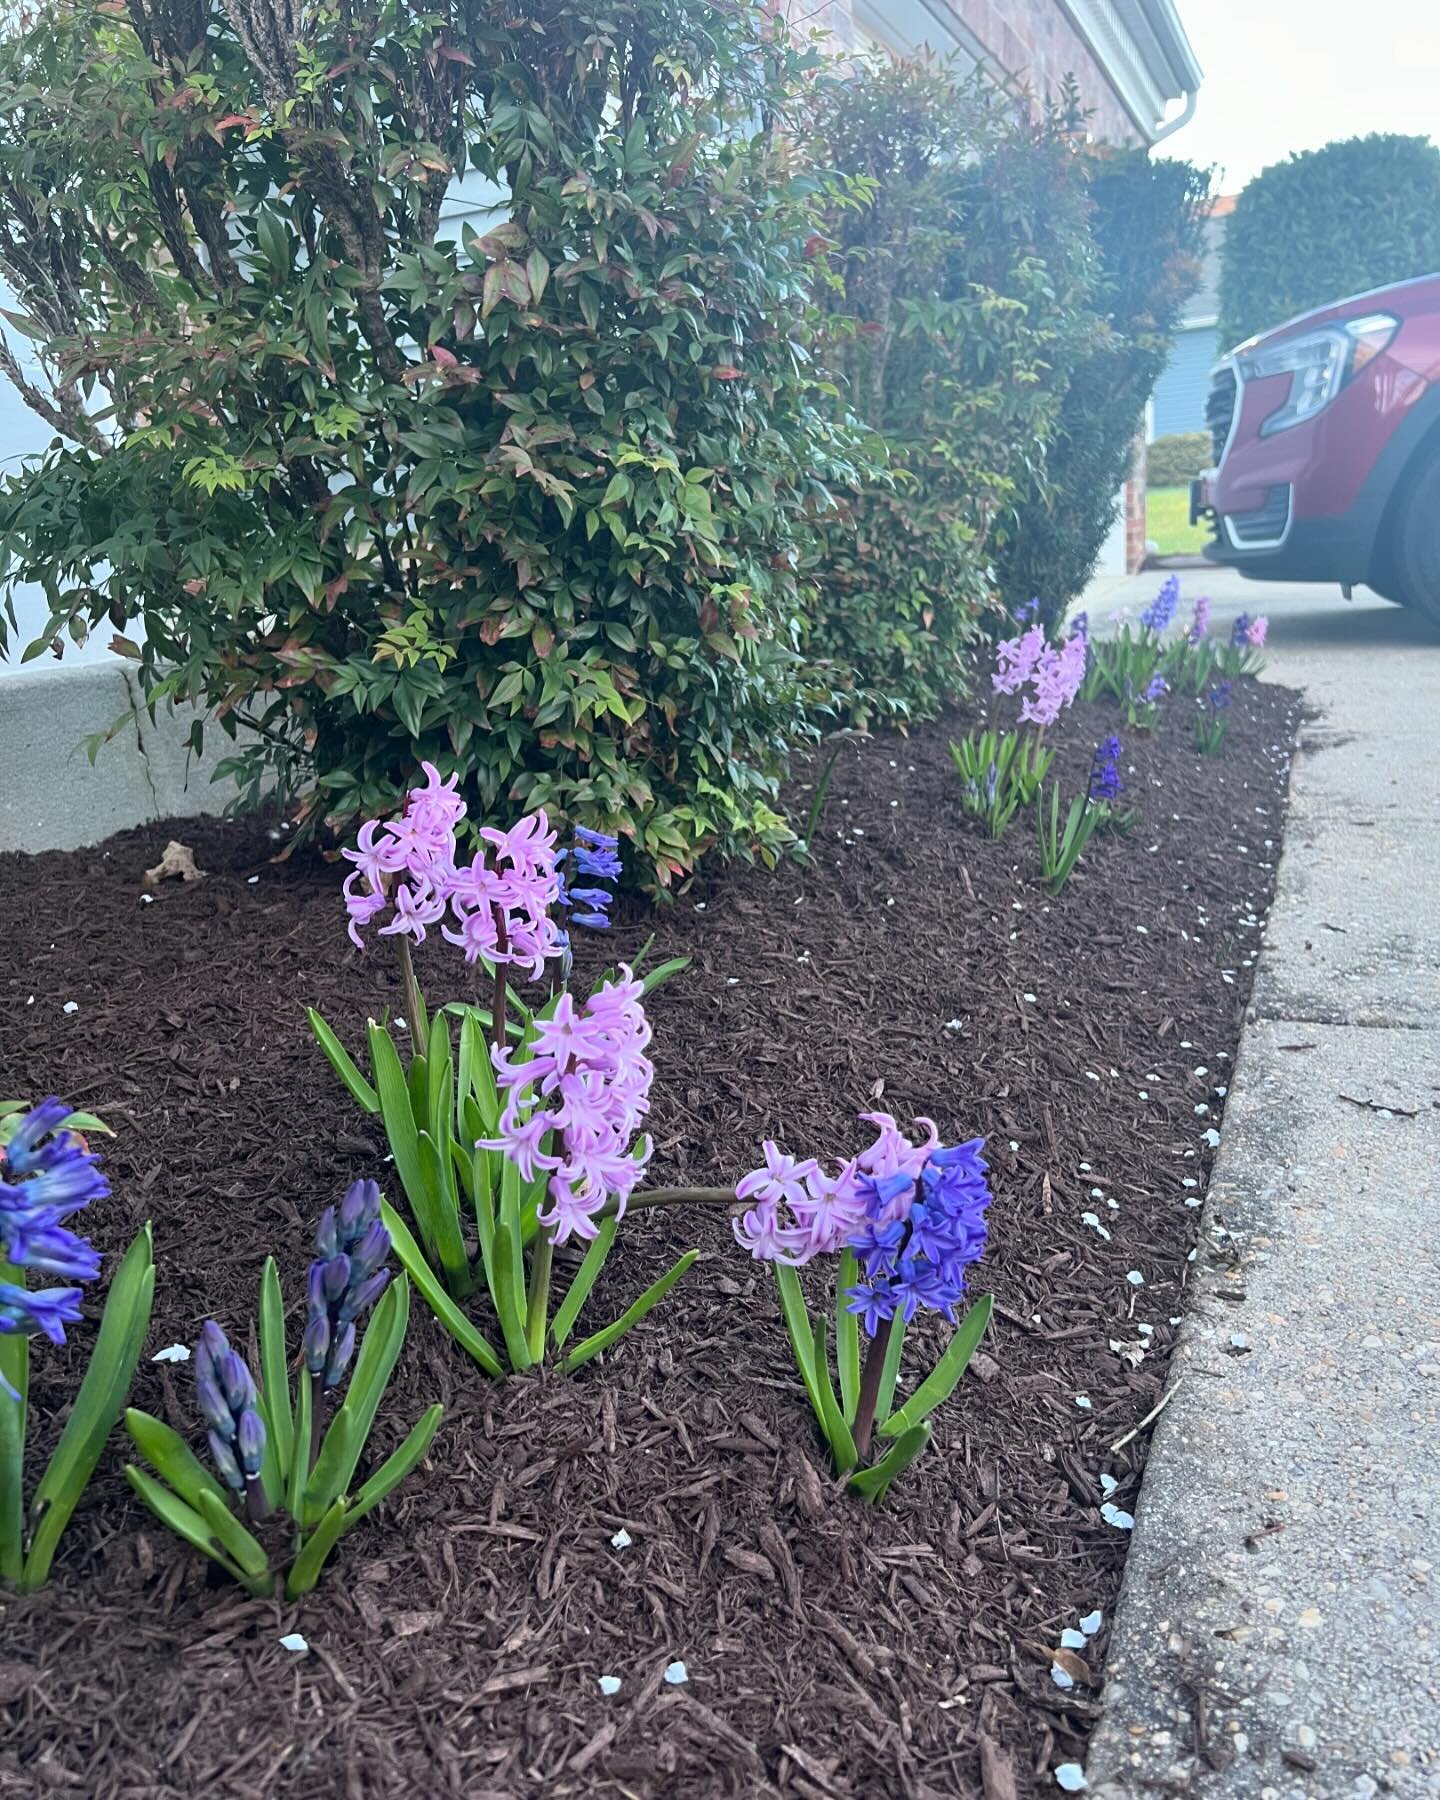 It&rsquo;s #spring and my yard is blooming! 😊 God bless the previous owners on the beautiful landscaping here 🙏🏾(&hellip;that&rsquo;s been easy to keep up with over the past 5 years). 
1. Hyacinth🪻
2. Pretty yellow bush&hellip;I don&rsquo;t know 